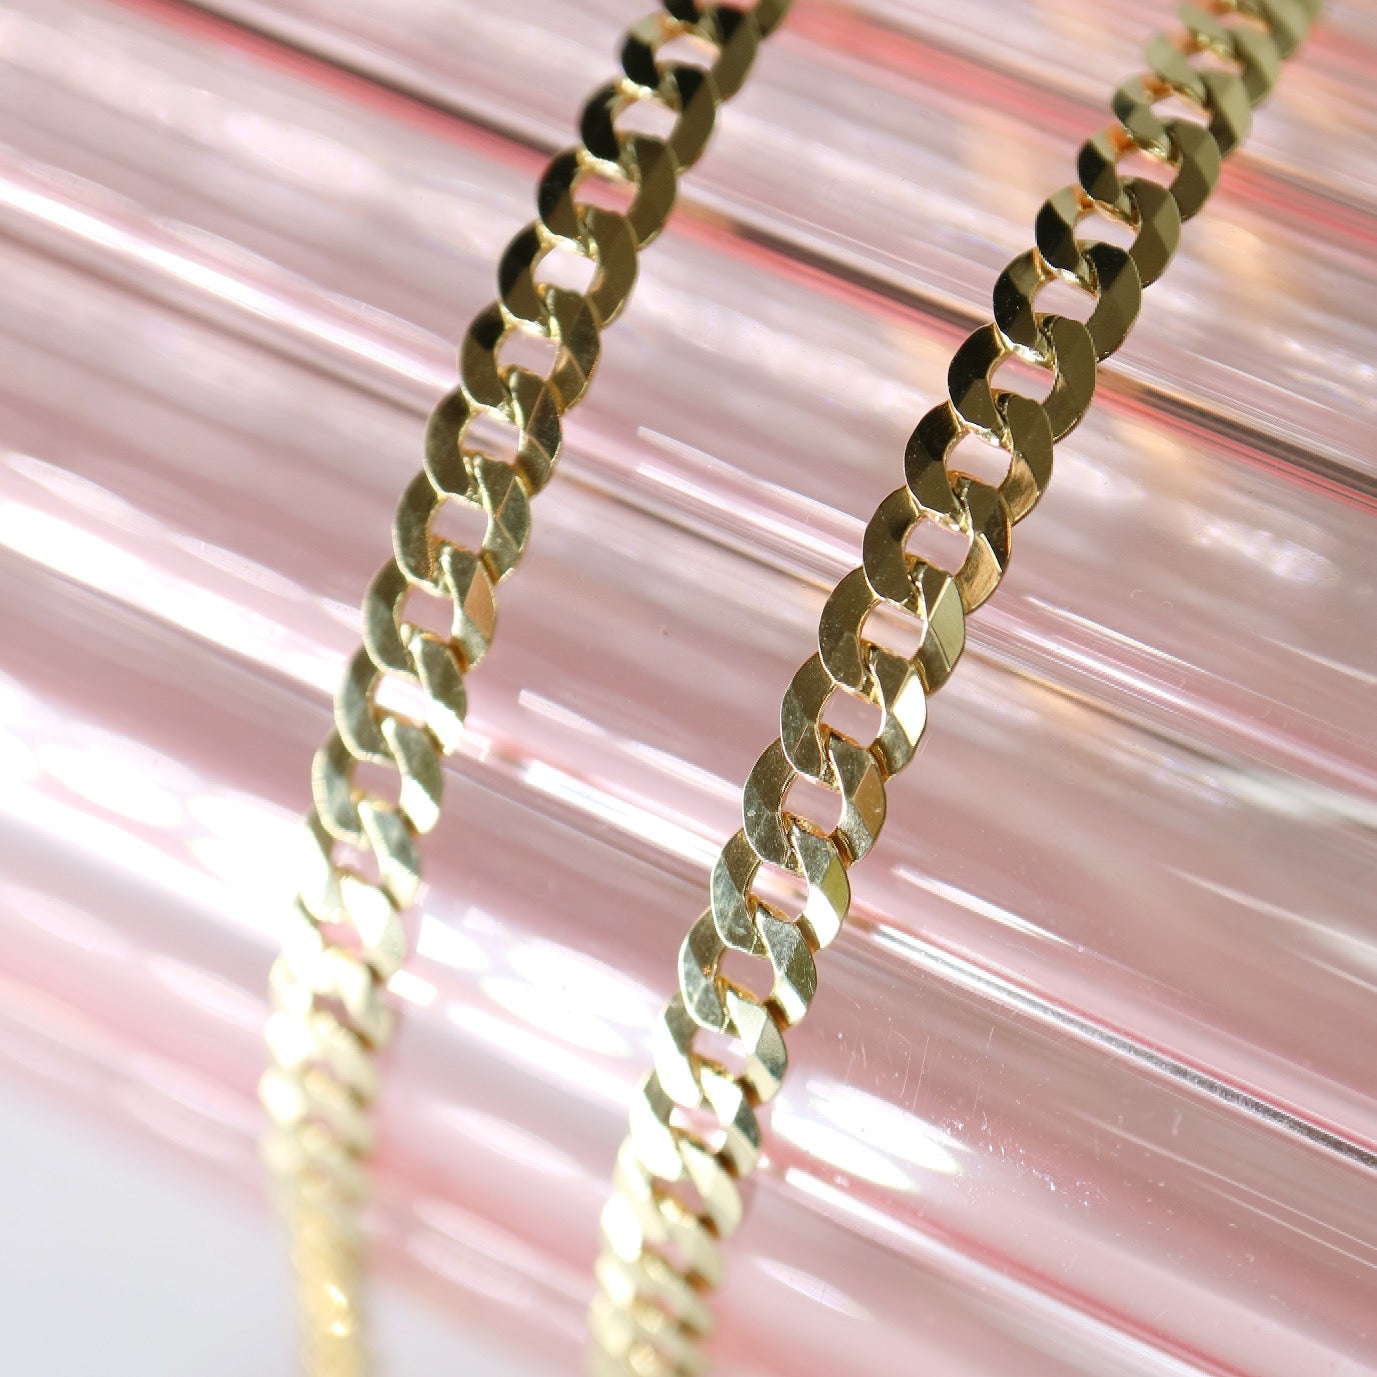 9kt gold Curb Chains from Collective & Co Jewellery